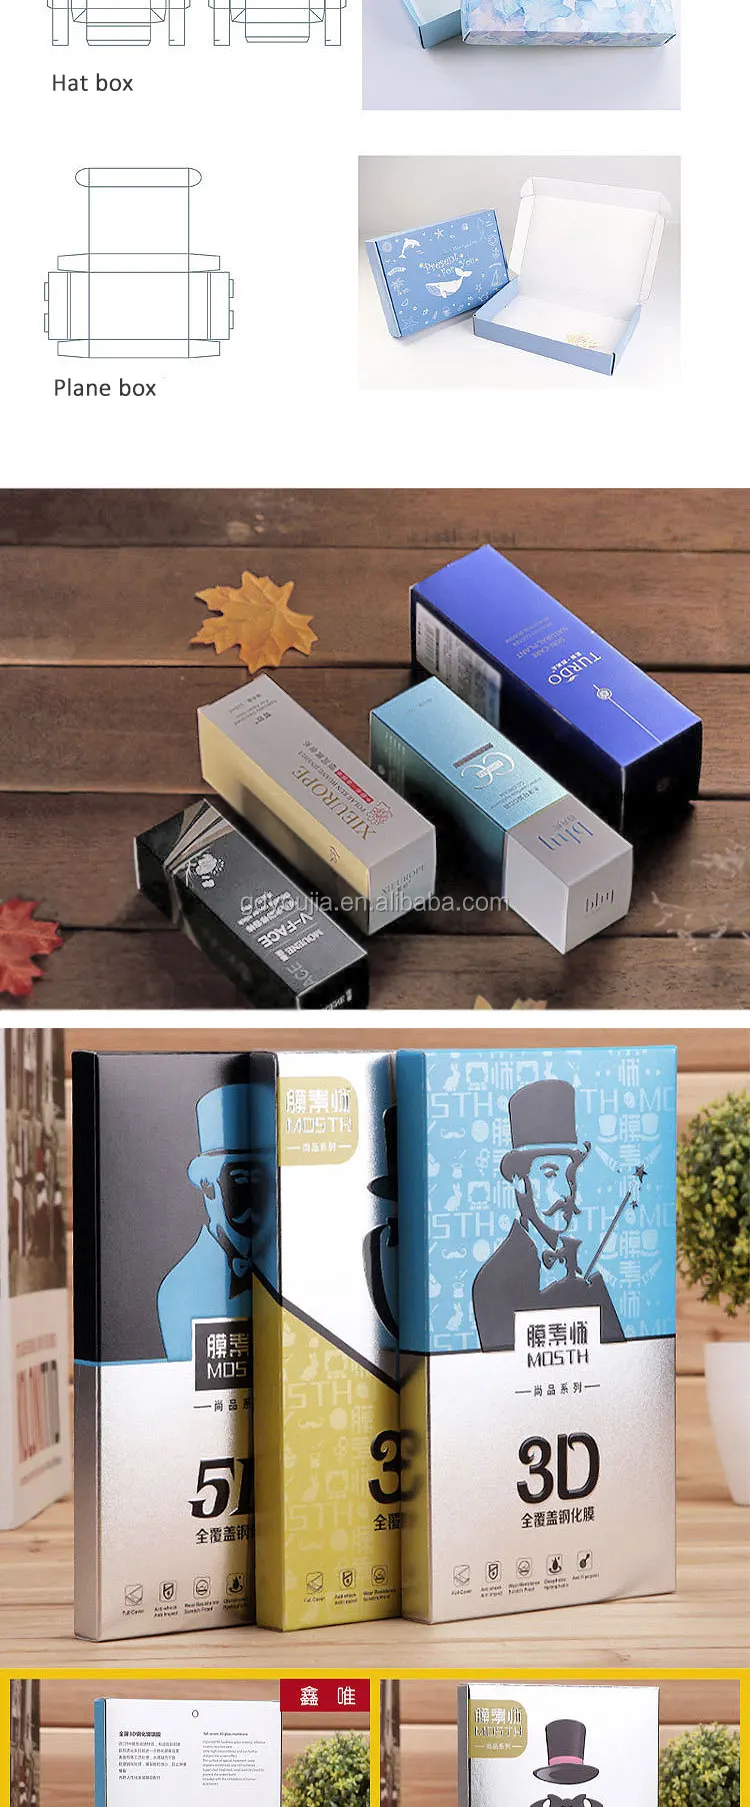 Download Wholesale Matte Custom Design Cosmetic Paper Box Lipstick Tube Packaging Design View Recycled Lipstick Box Custom Product Details From Guangzhou Youjia Printing Co Ltd On Alibaba Com Yellowimages Mockups